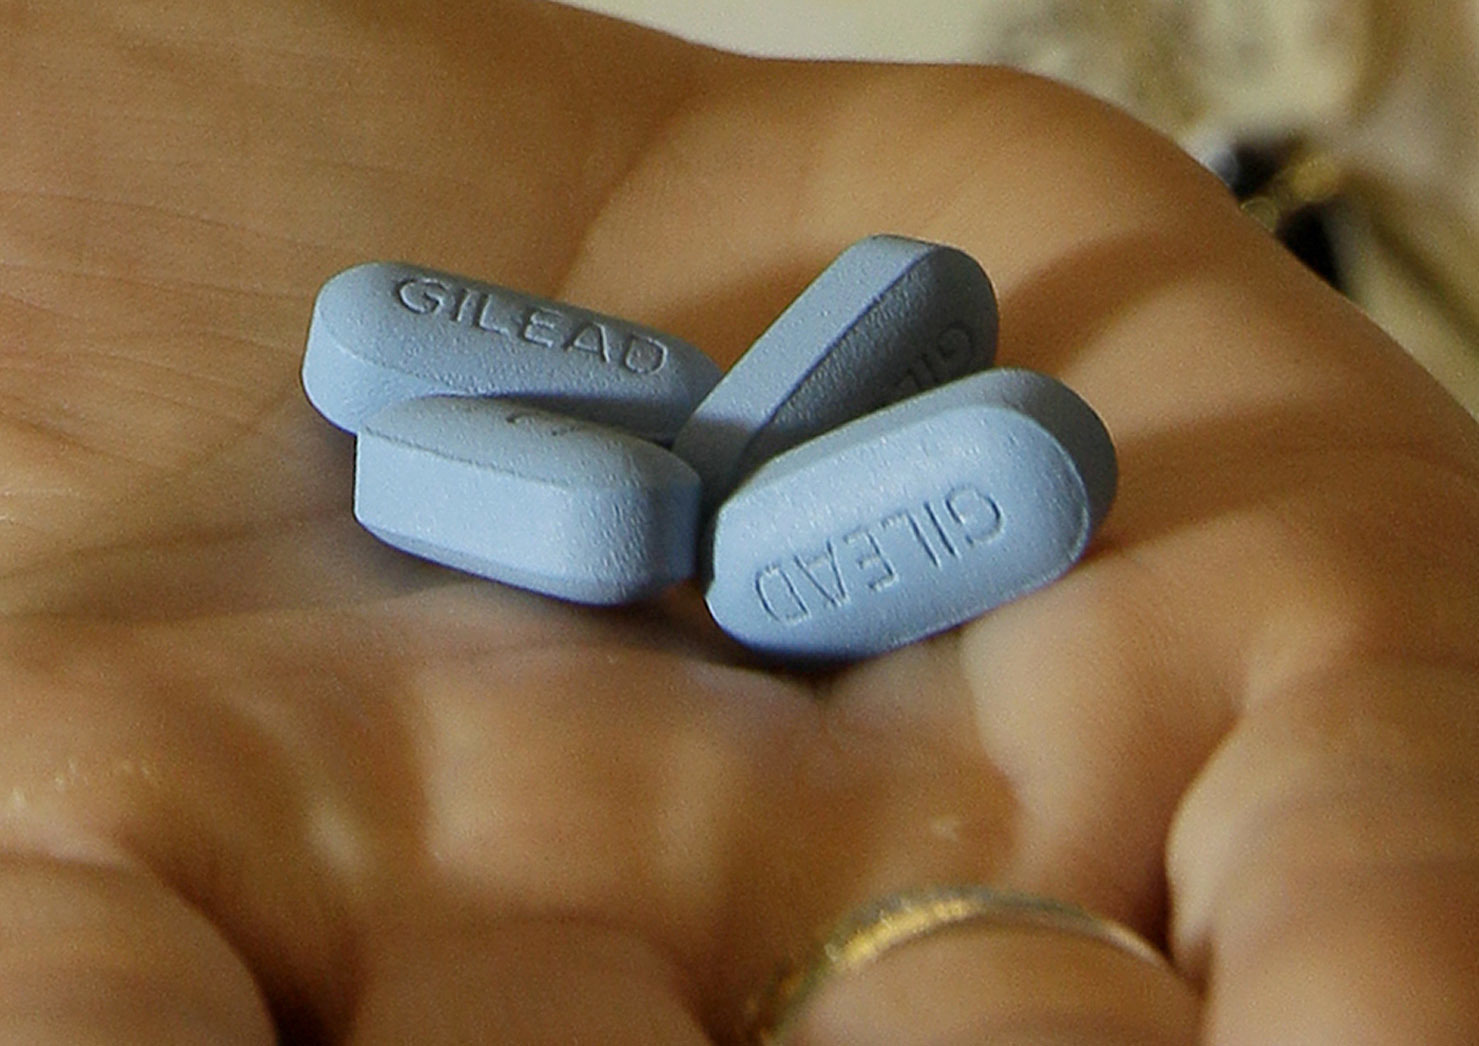 HIV Prevention Drug Uptake In Wisconsin Lags Behind Other States